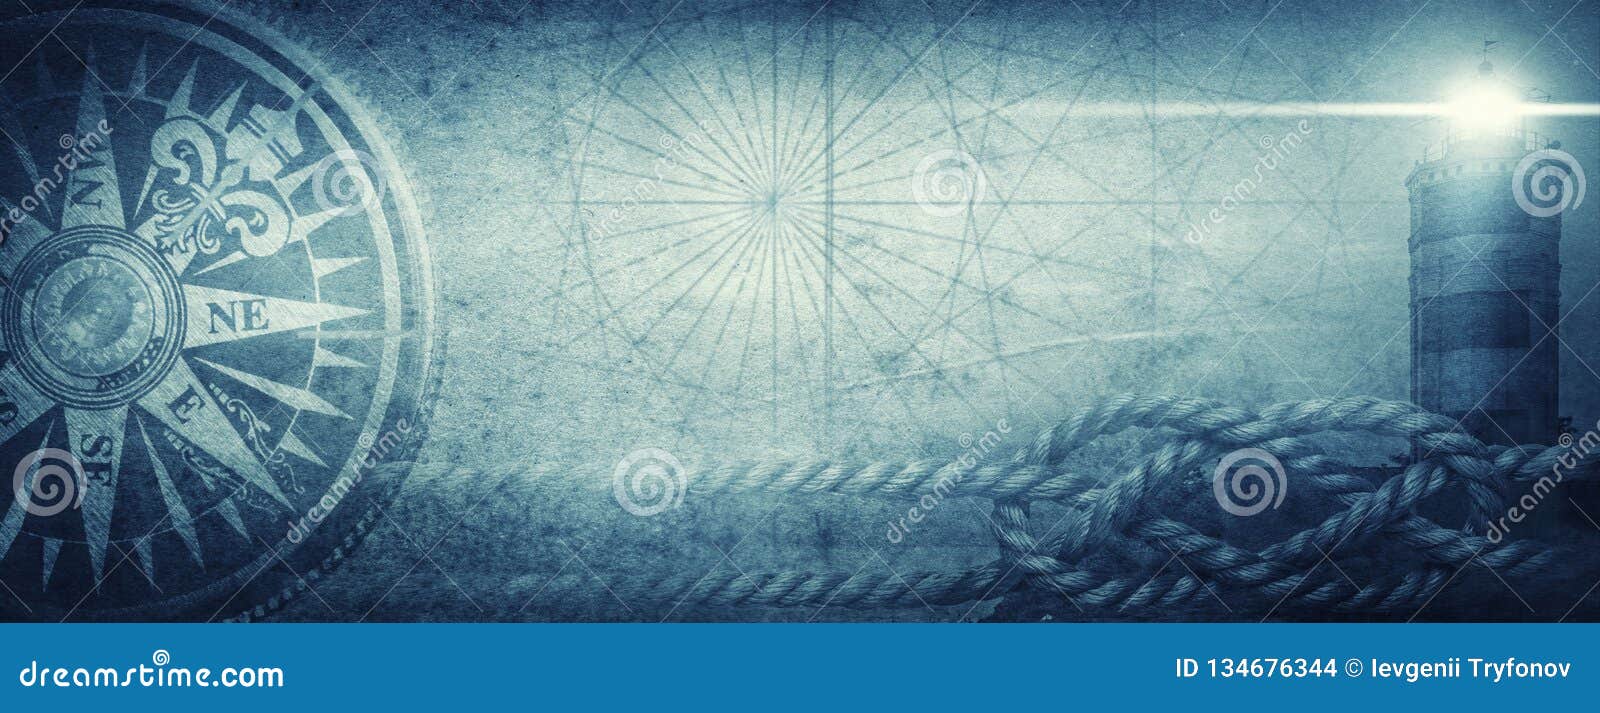 airplane ship compass on abstract blue background, Stock image